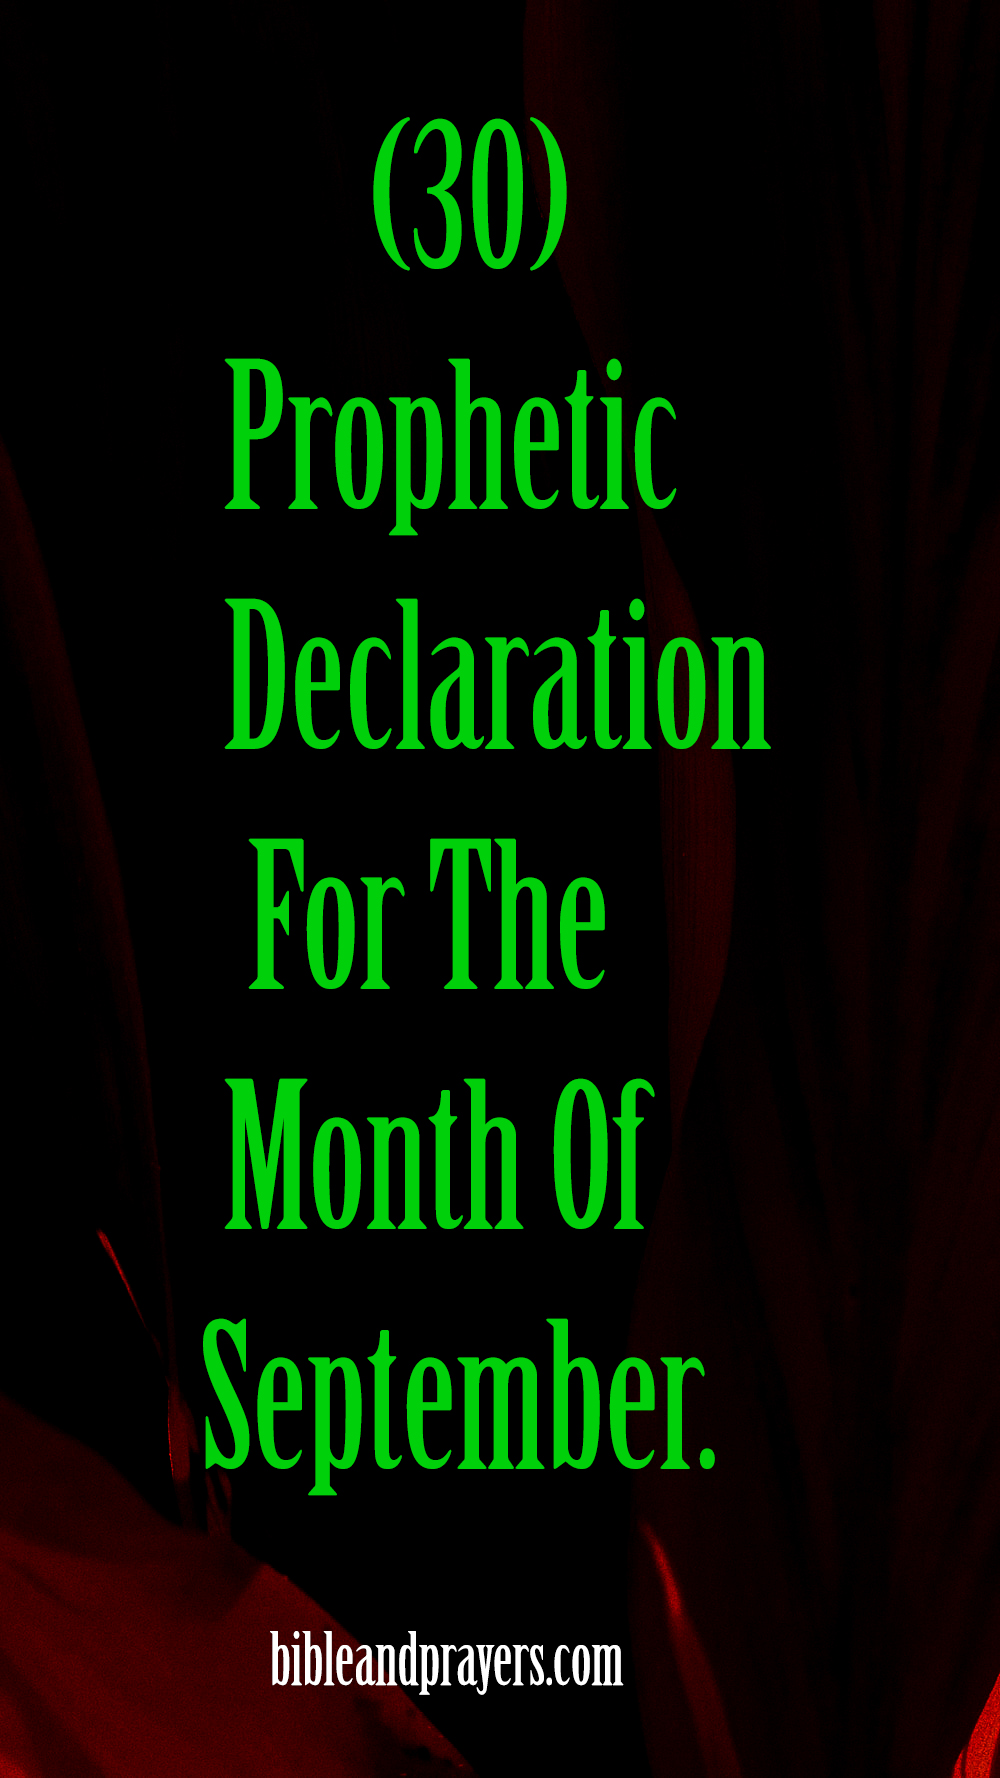 30 Prophetic Declaration For The Month Of September.